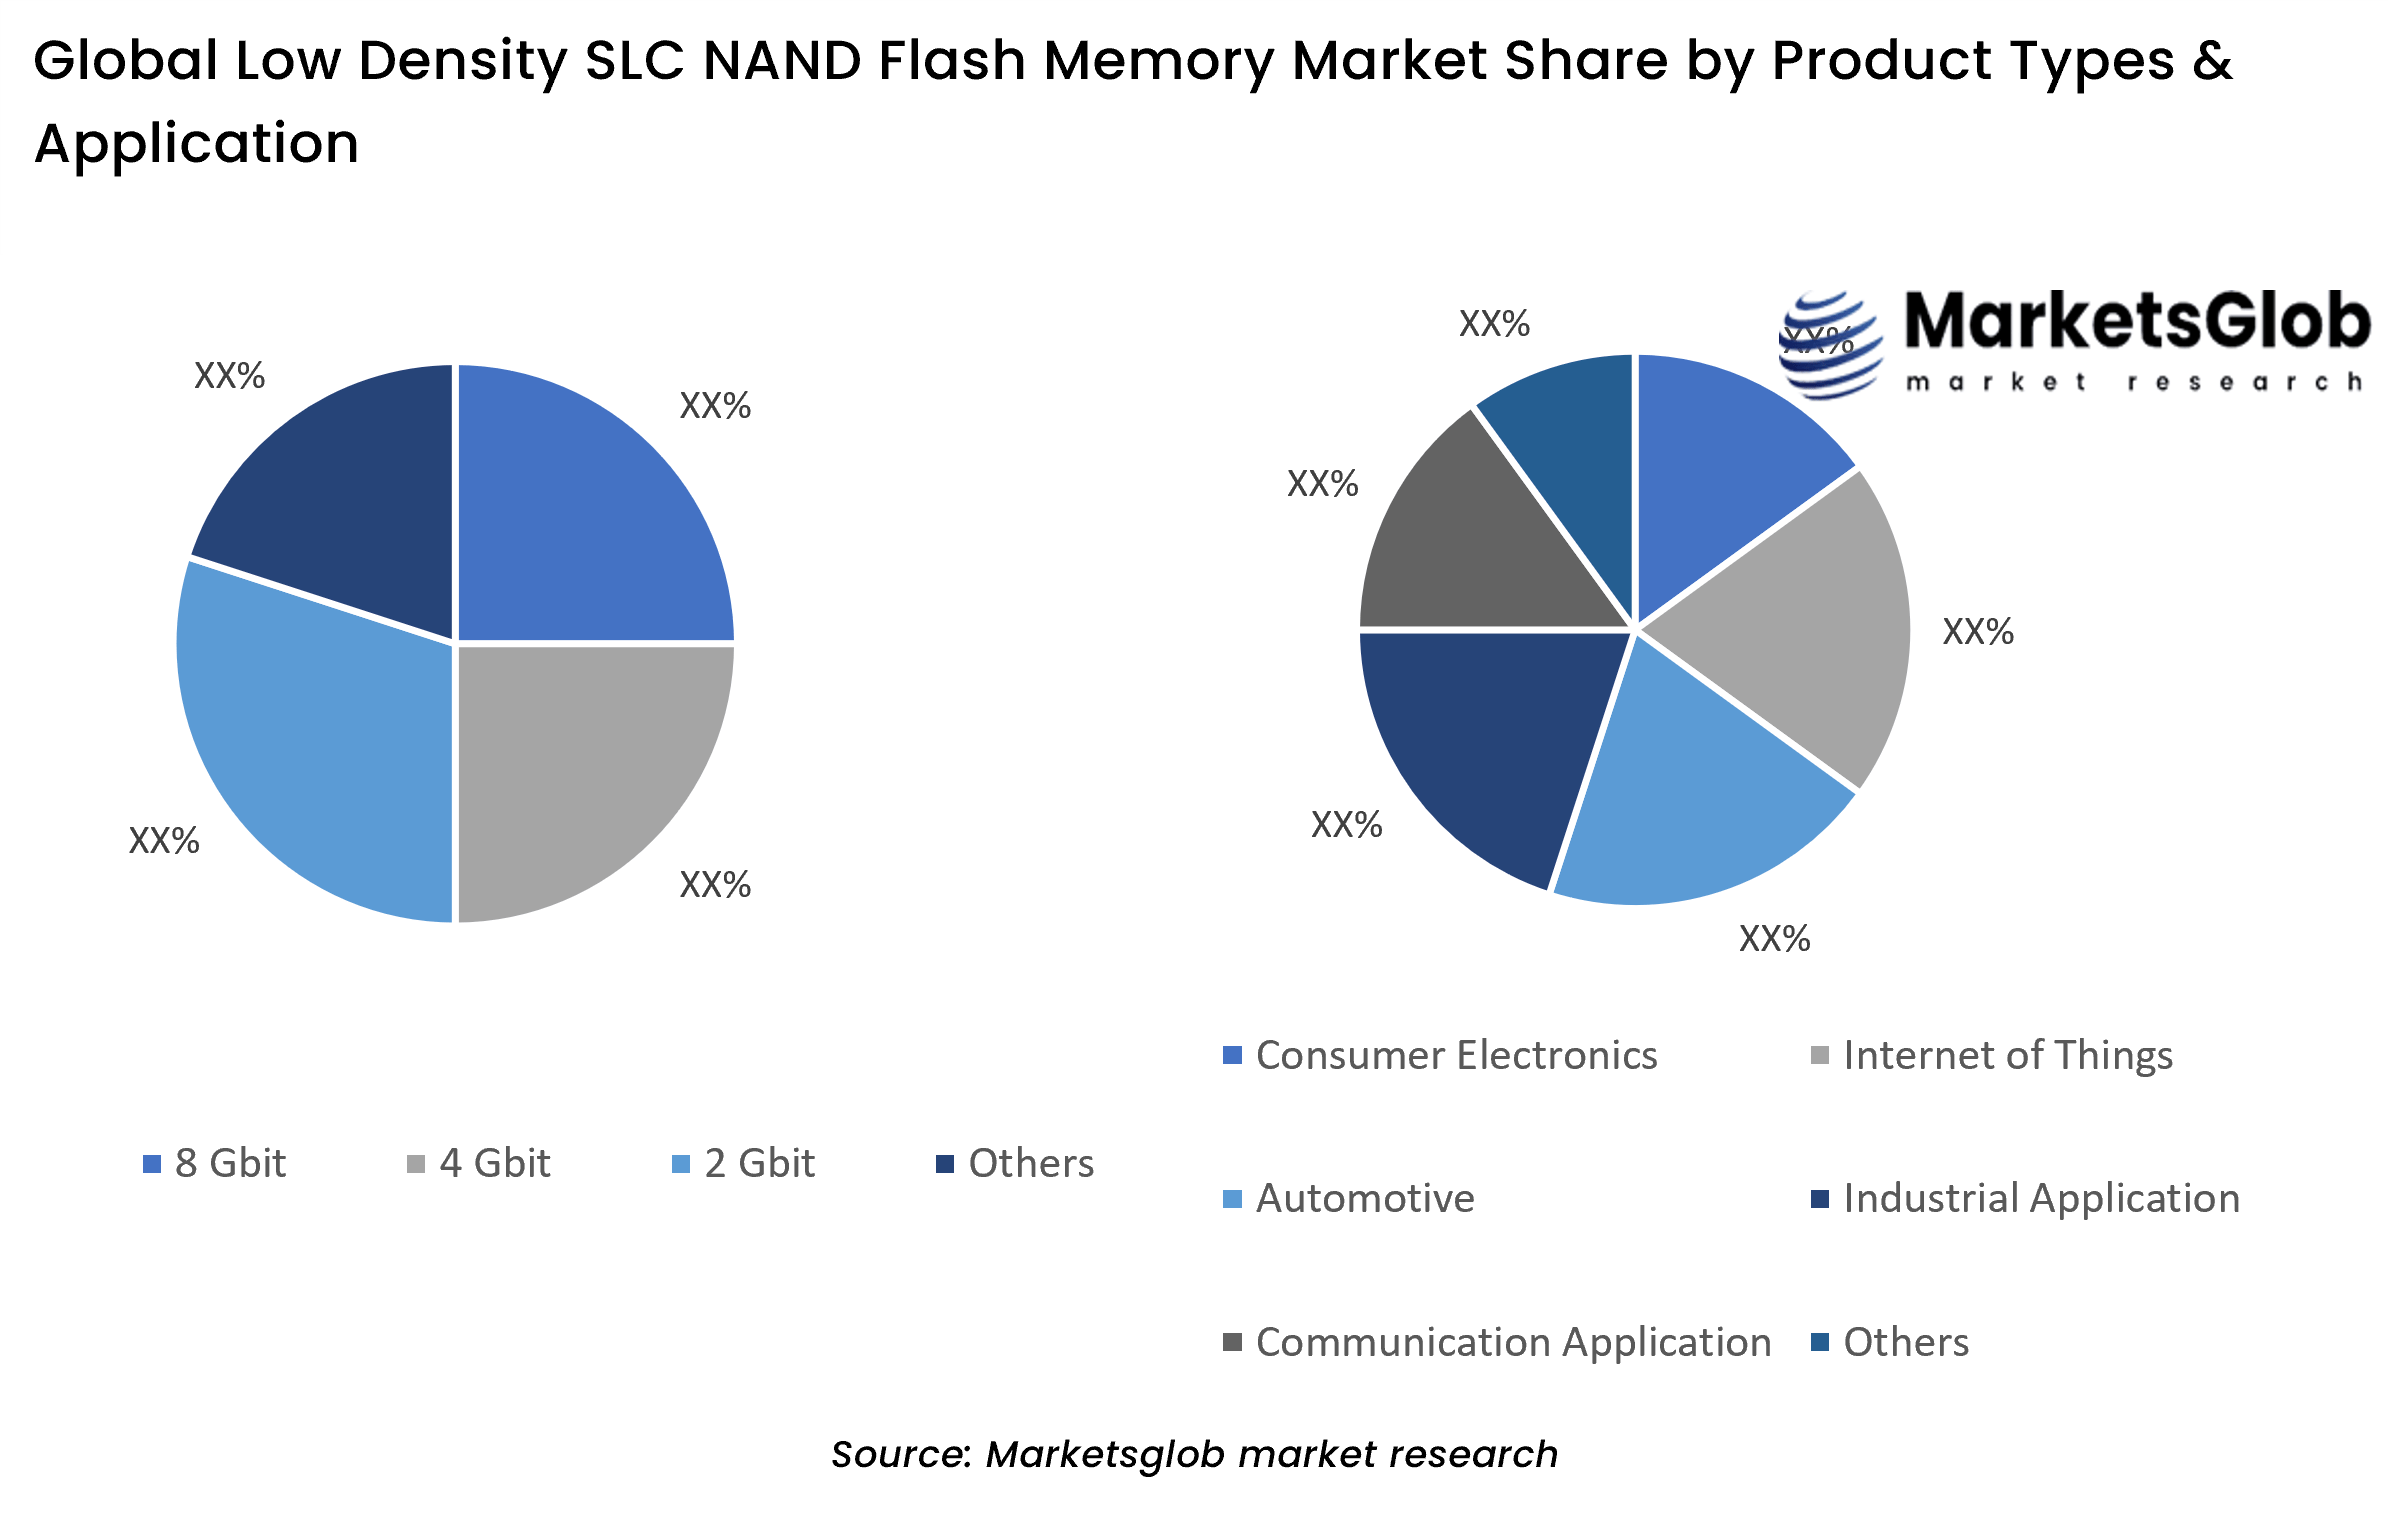 Low Density SLC NAND Flash Memory Share by Product Types & Application